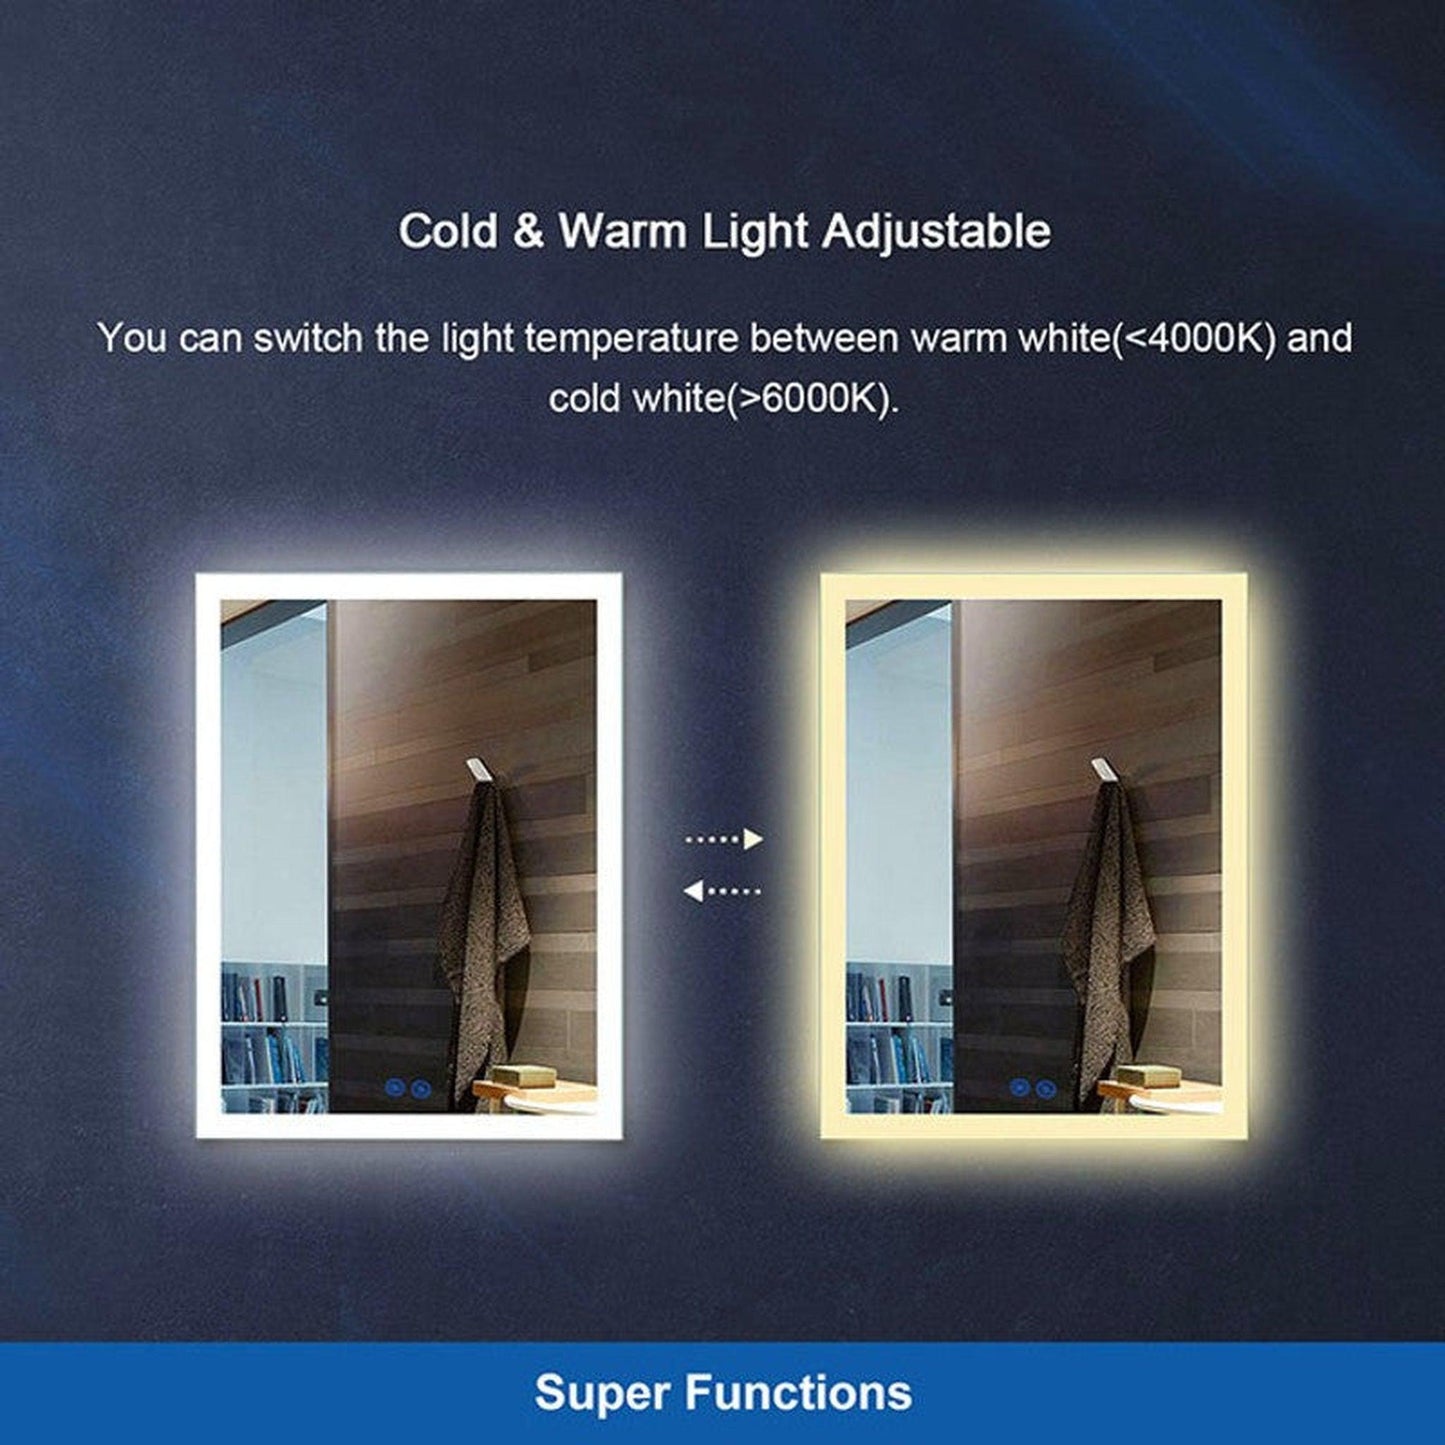 Moreno Francisco 55" x 32" Frameless LED Mirror With Cool and Warm Lighting Options